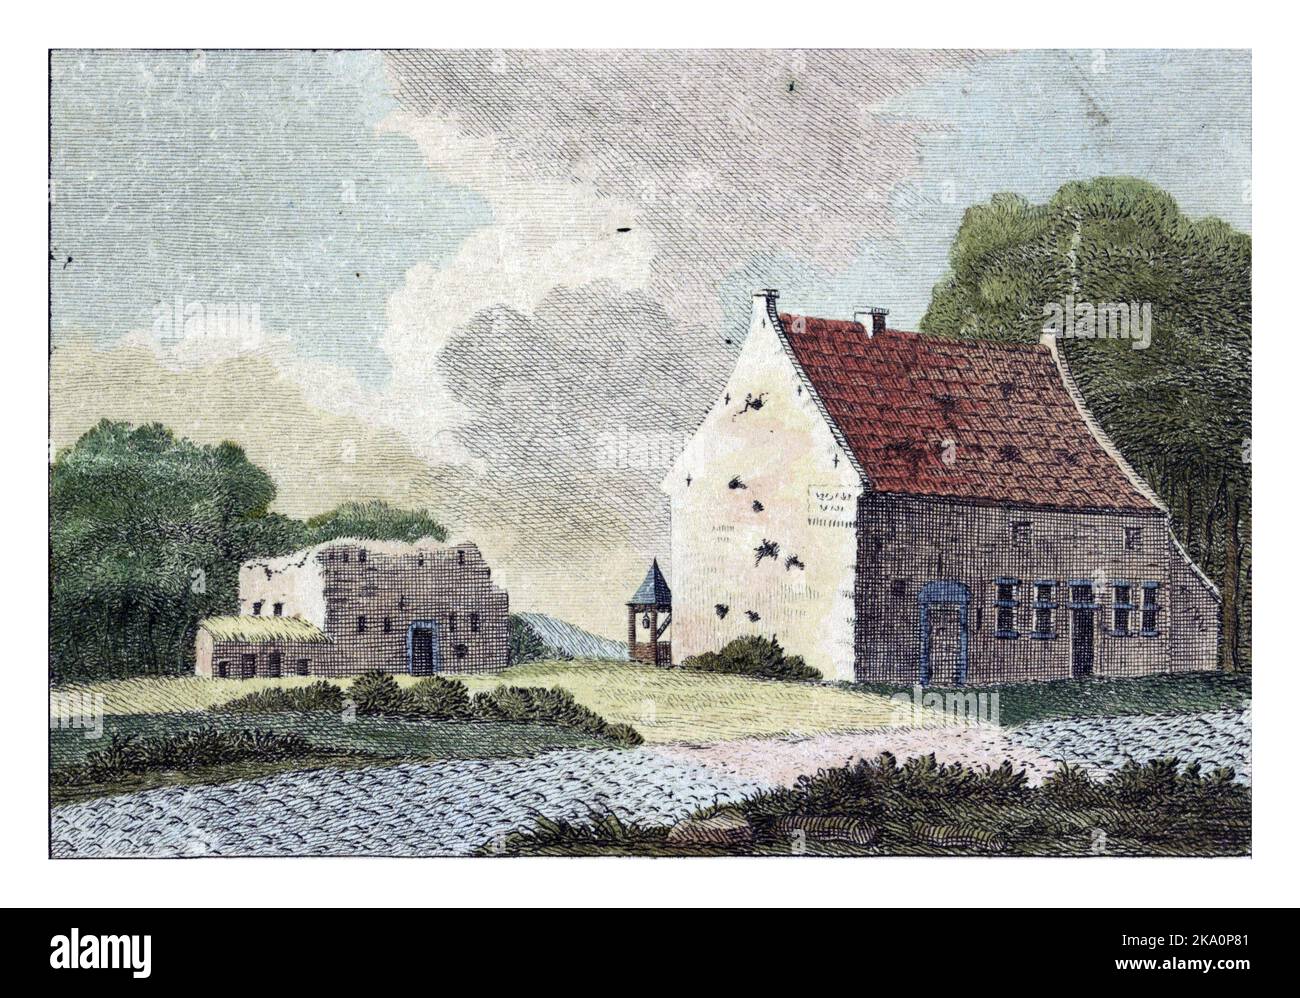 The La Belle Alliance inn. Part of a group of four plates of buildings in the vicinity of the Waterloo battlefield (June 18, 1815). Stock Photo